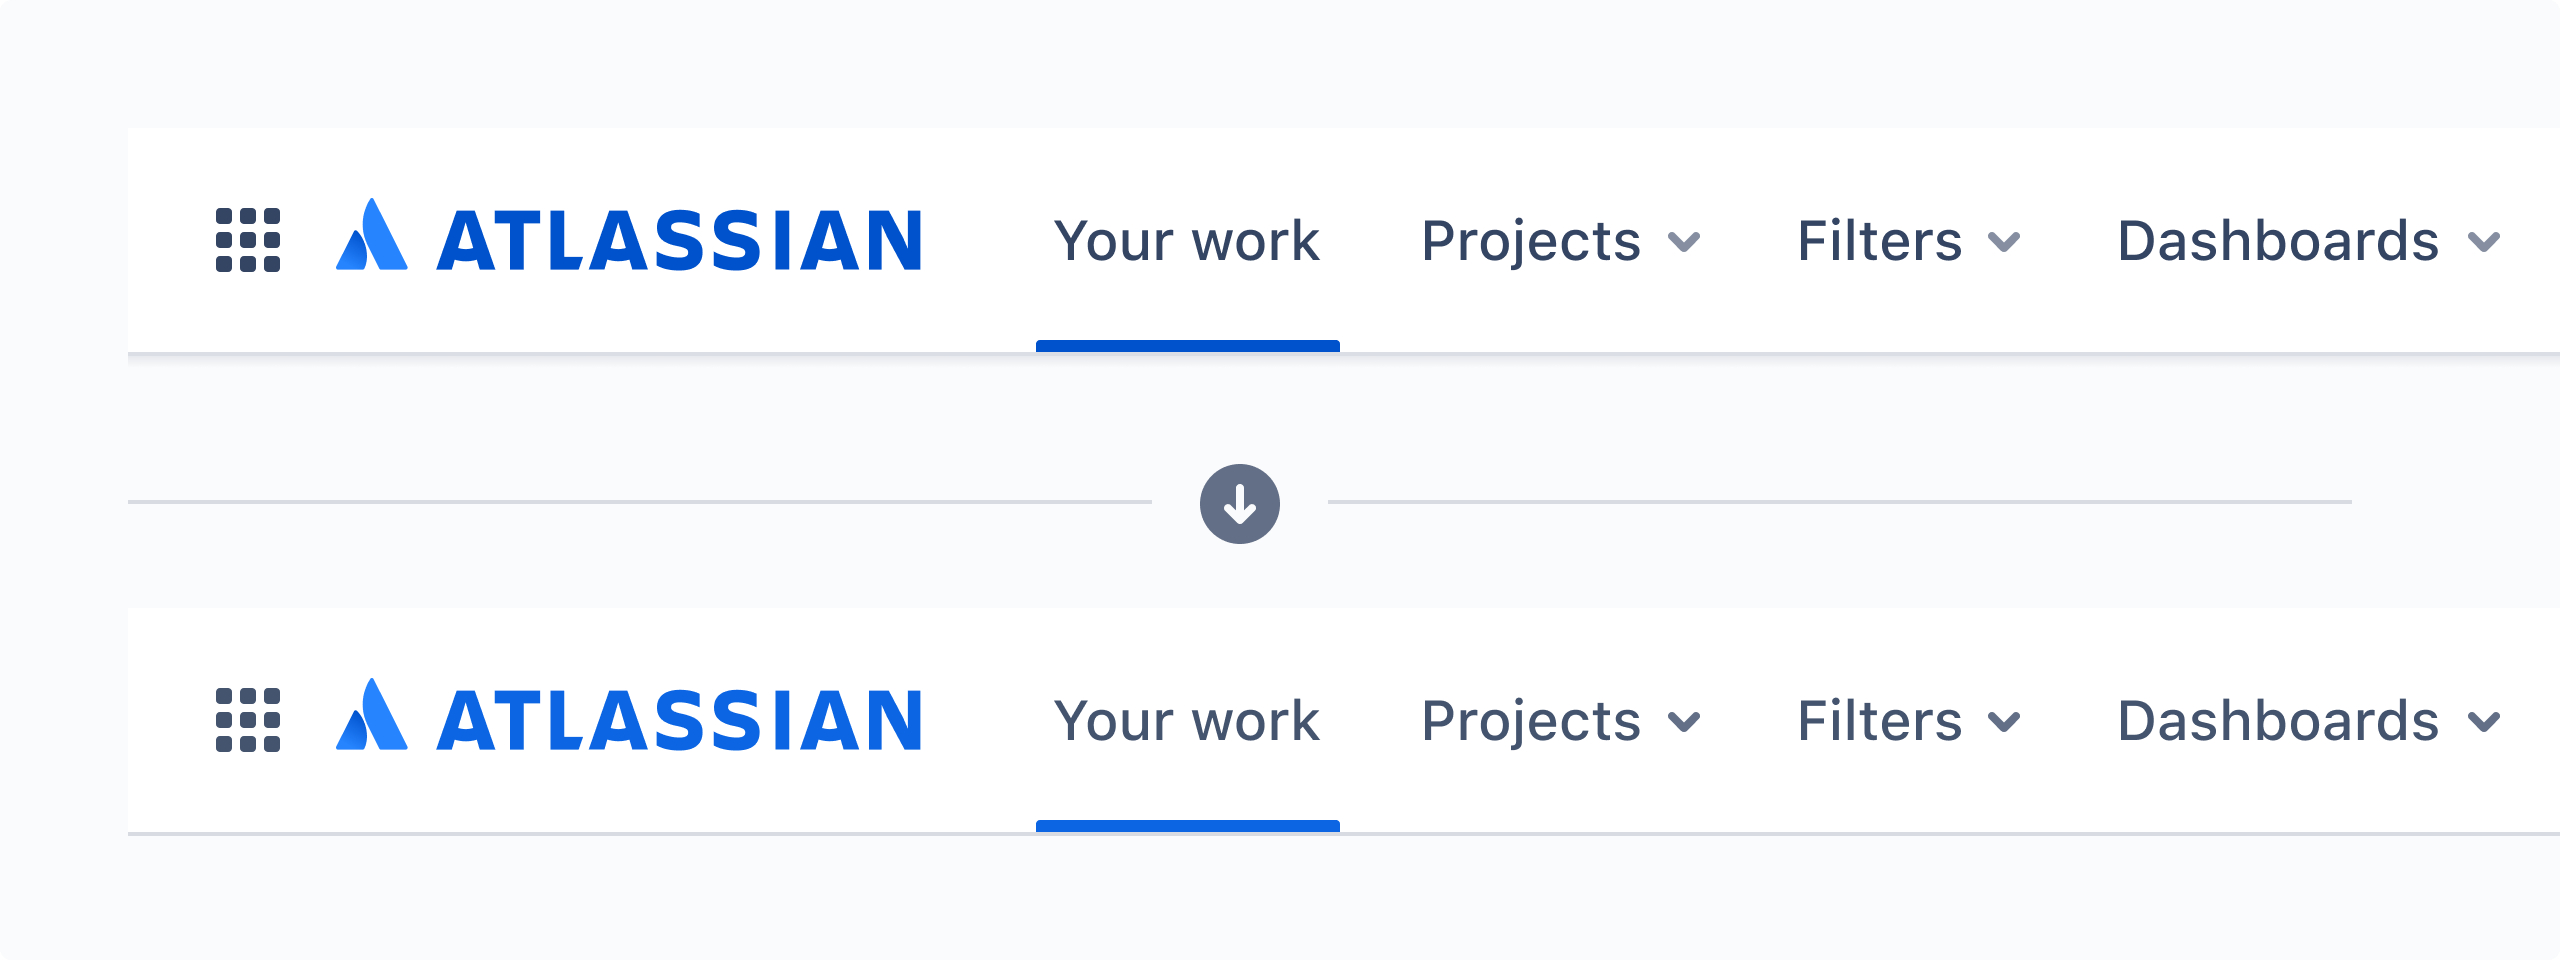 A comparison of the Atlassian top navigation bar using the old elevation style with a slight shadow and the new one with a simple border separating it from the rest of the UI.